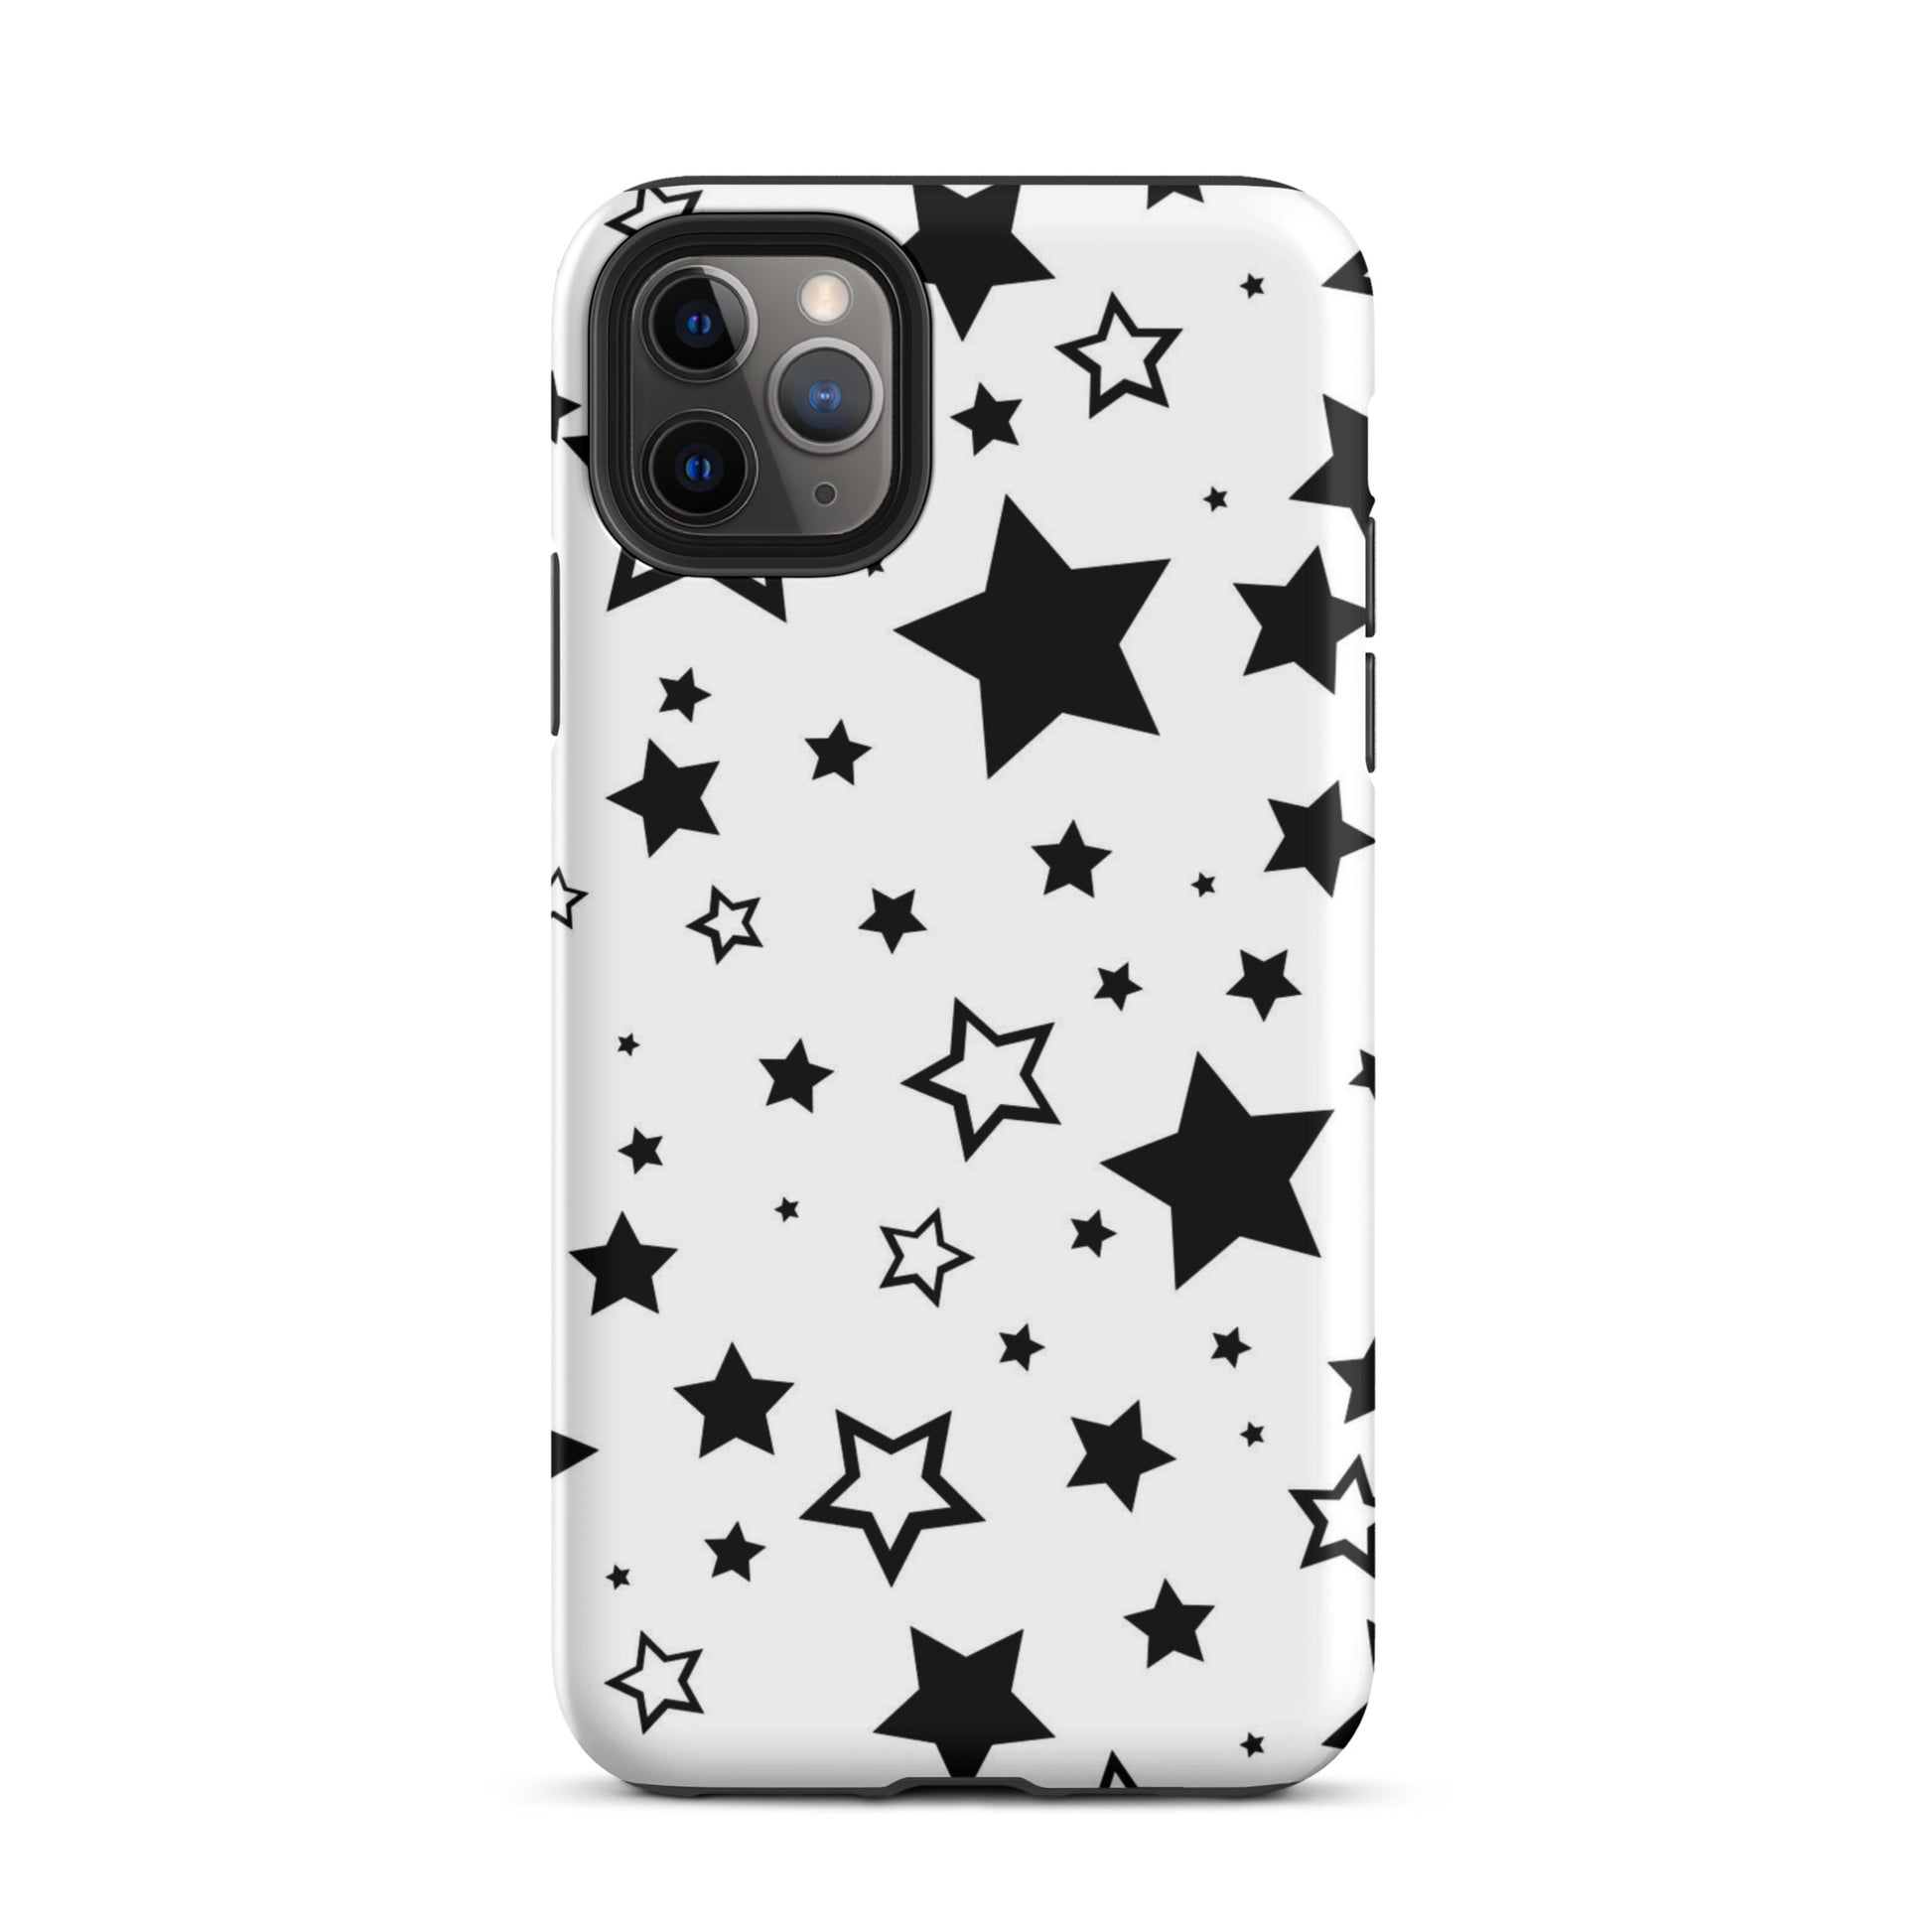 Star Girl iPhone Case iPhone 11 Pro Max Matte